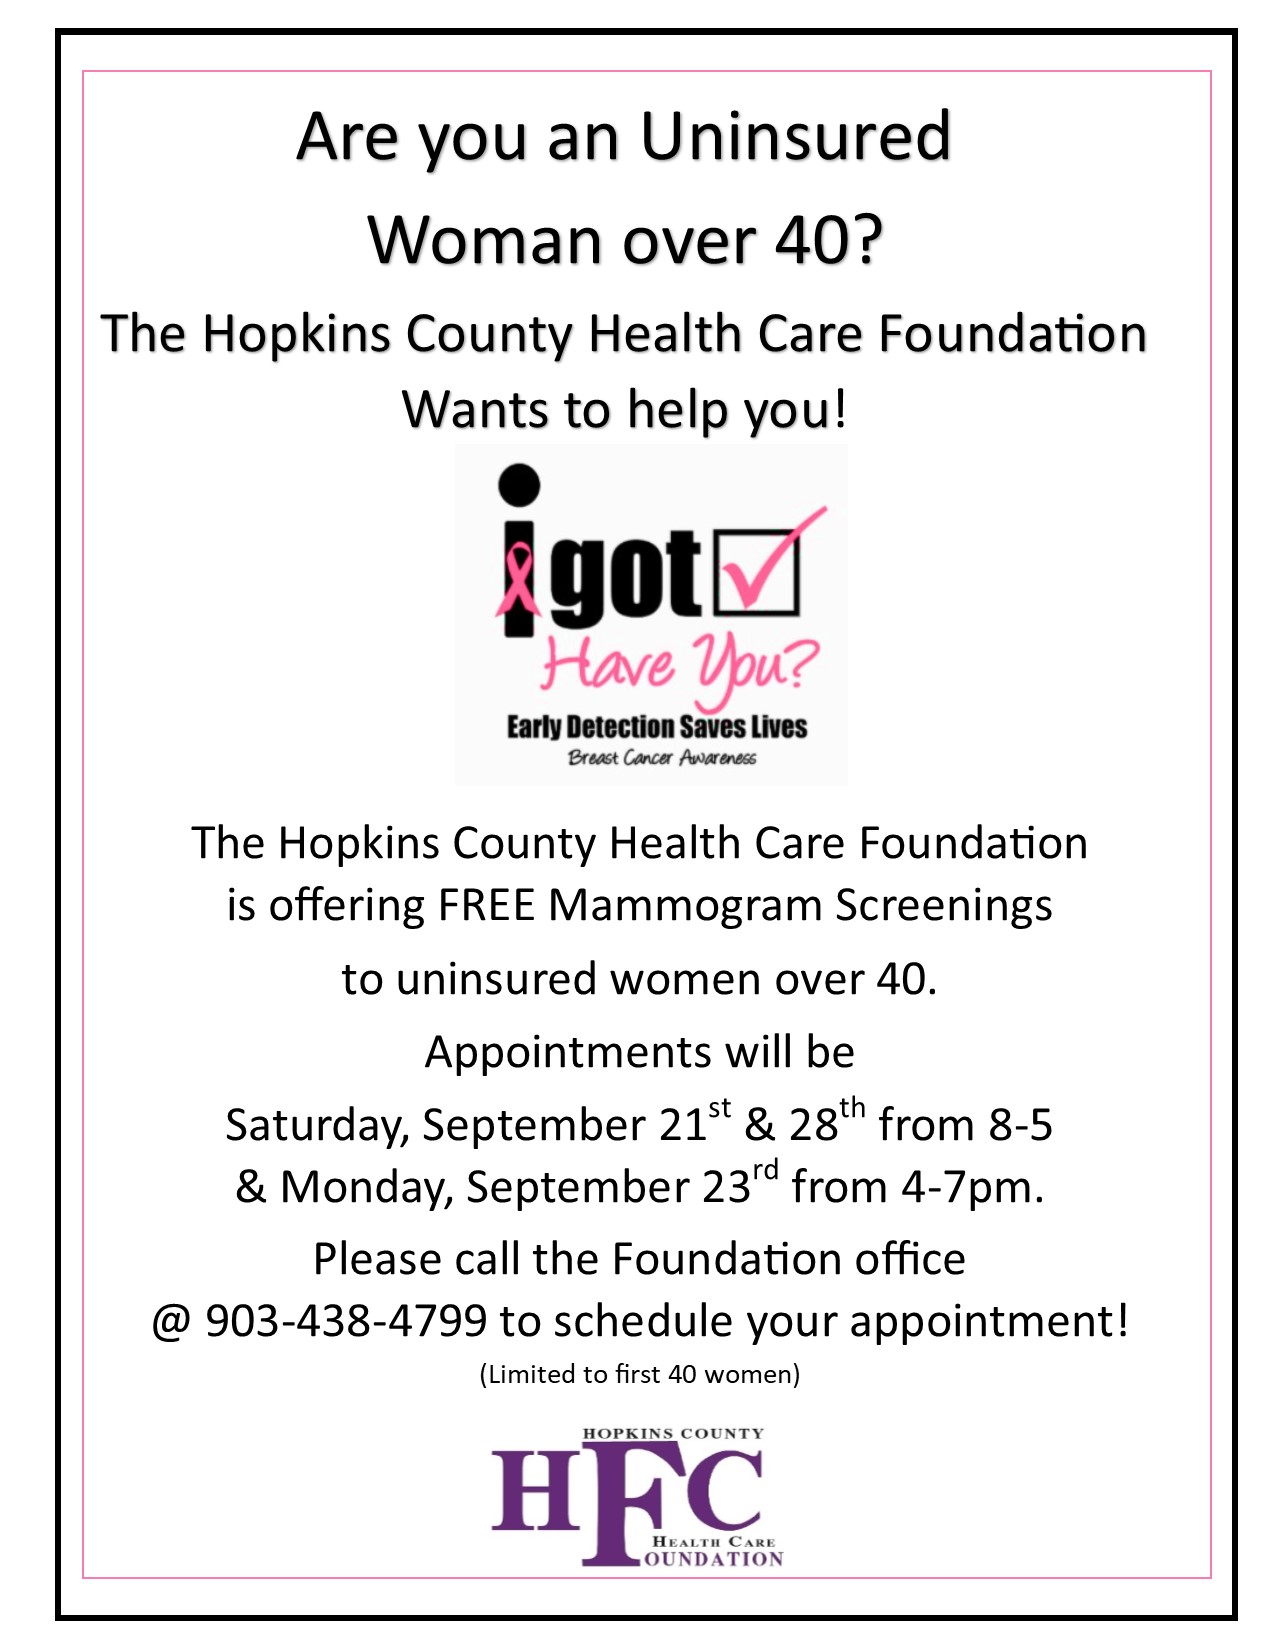 Hopkins County Health Care Foundation Offering Free Mammogram Screenings for Uninsured Women Over 40